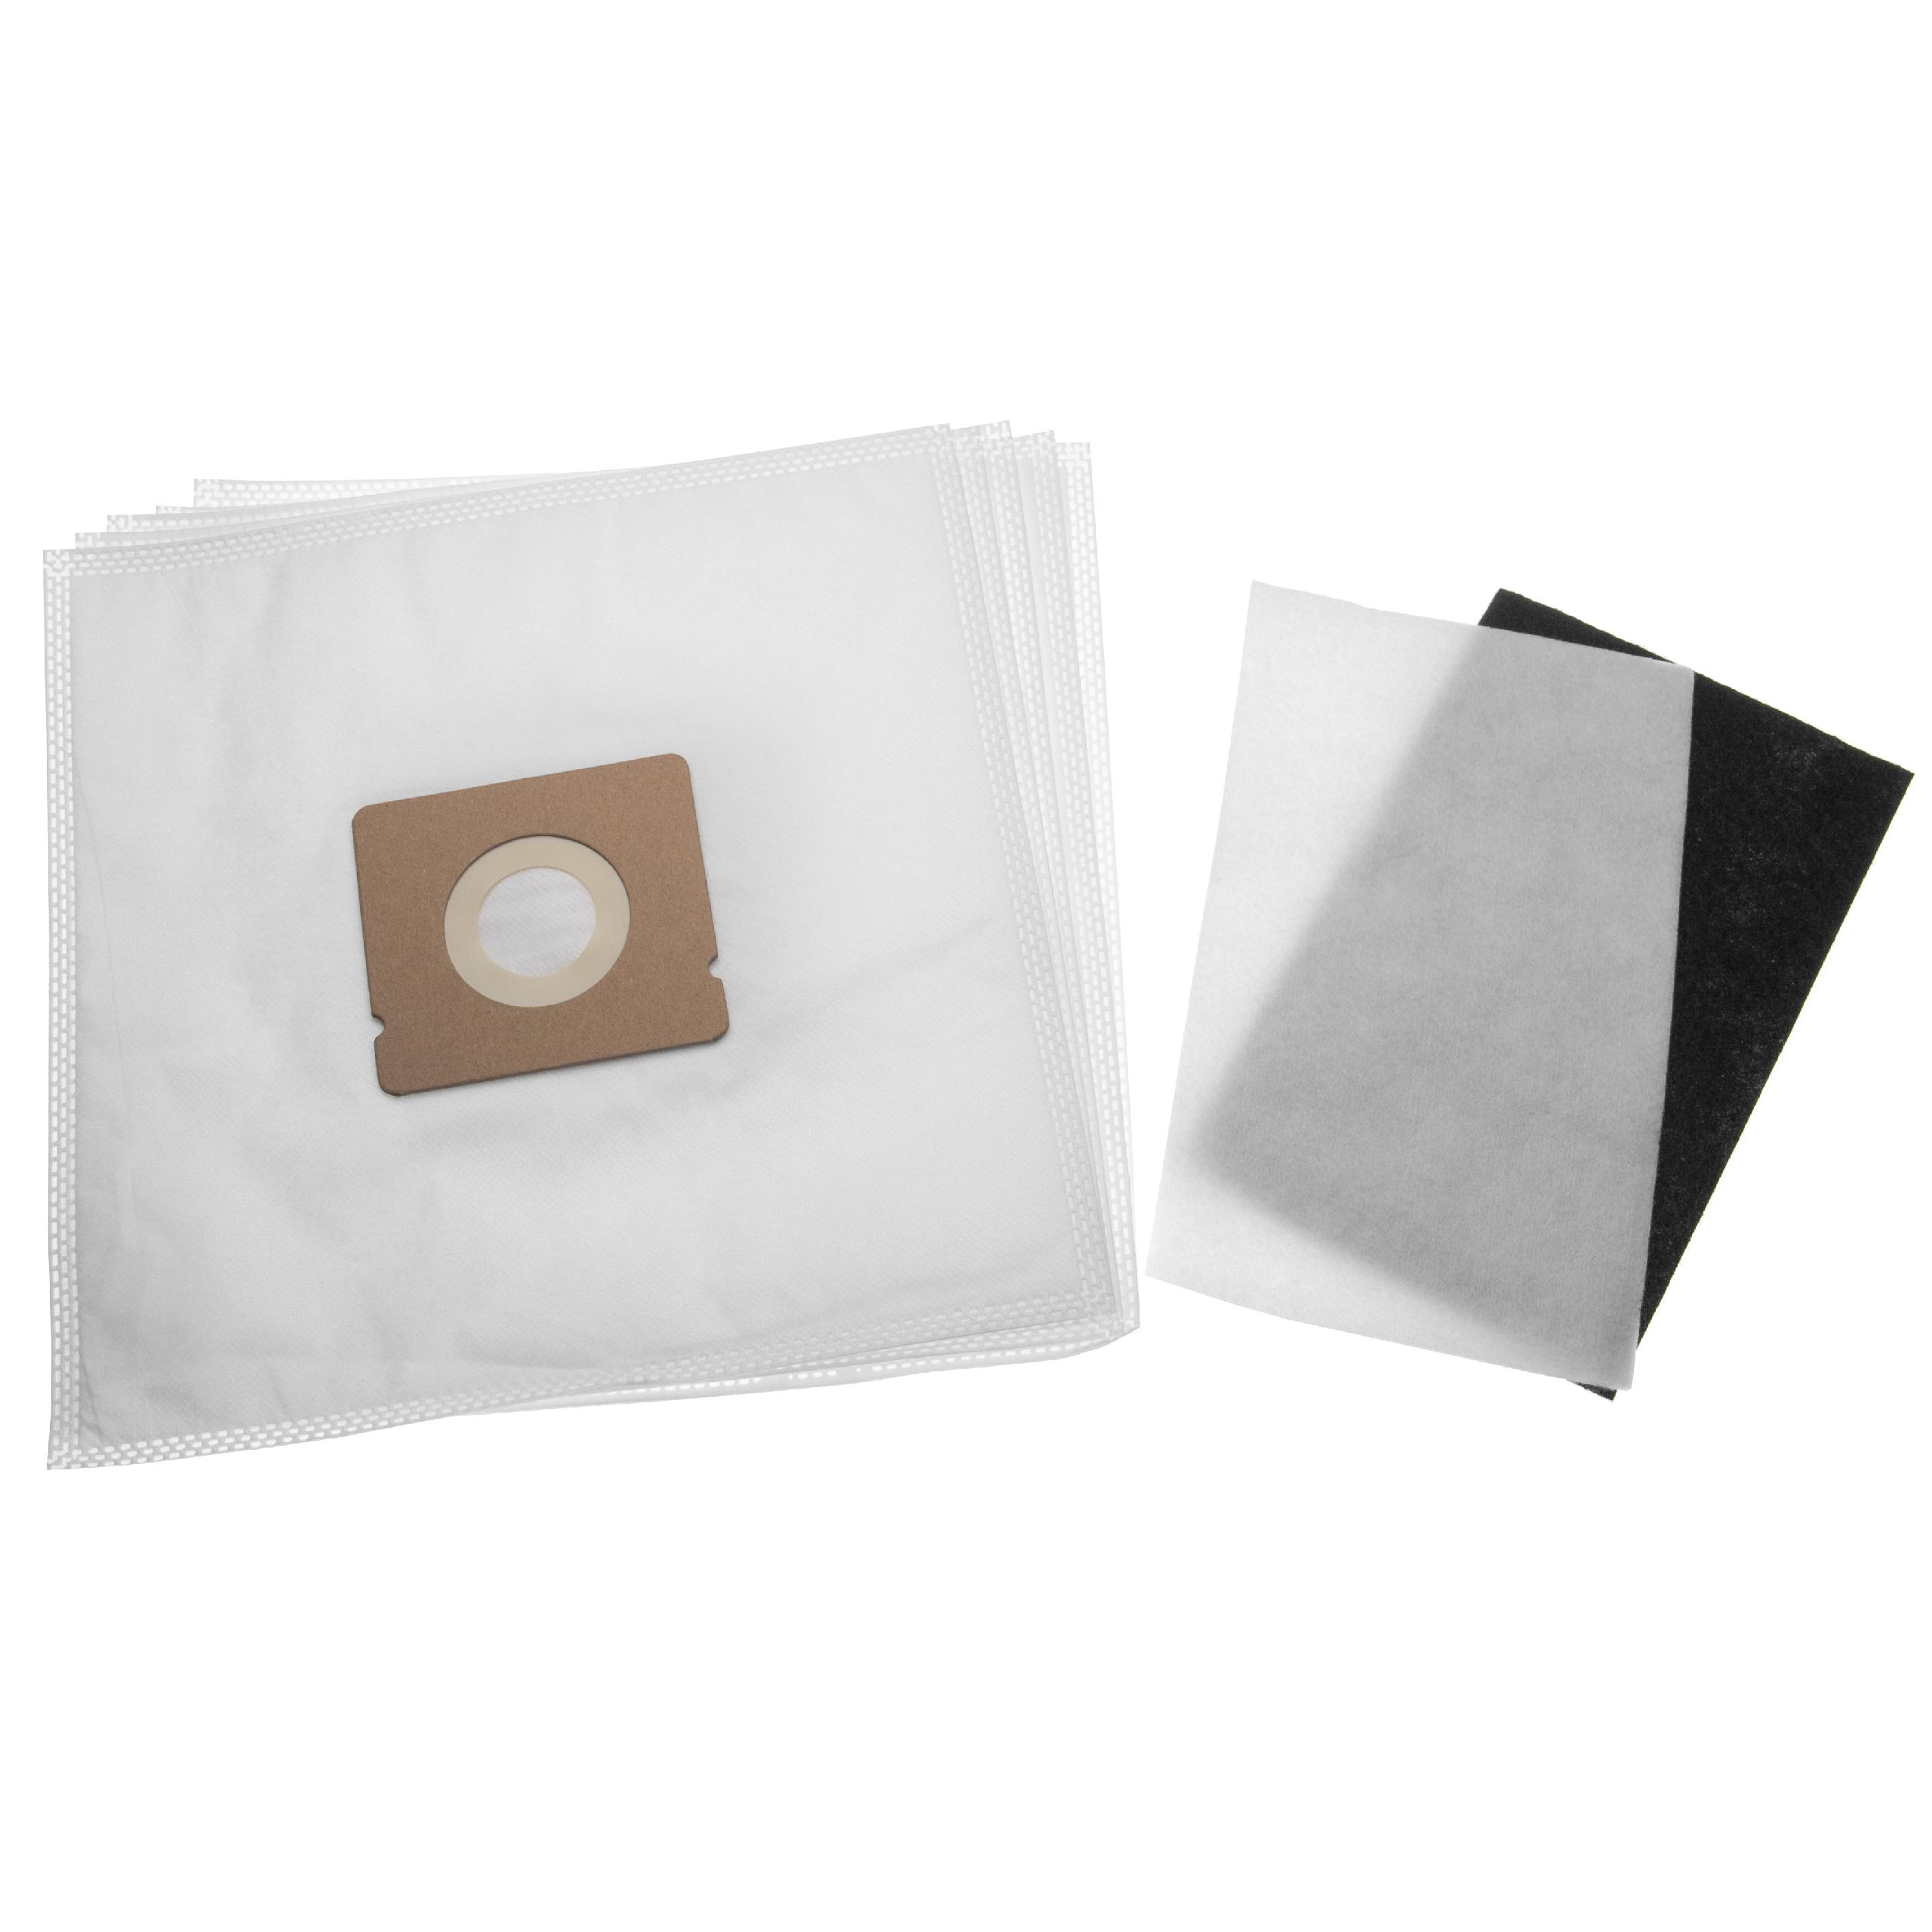 6-Part Filter + Microfleece Bag Set replaces Rowenta 832696, 900 19 58-45/4 for Moulinex Vacuum Cleaner